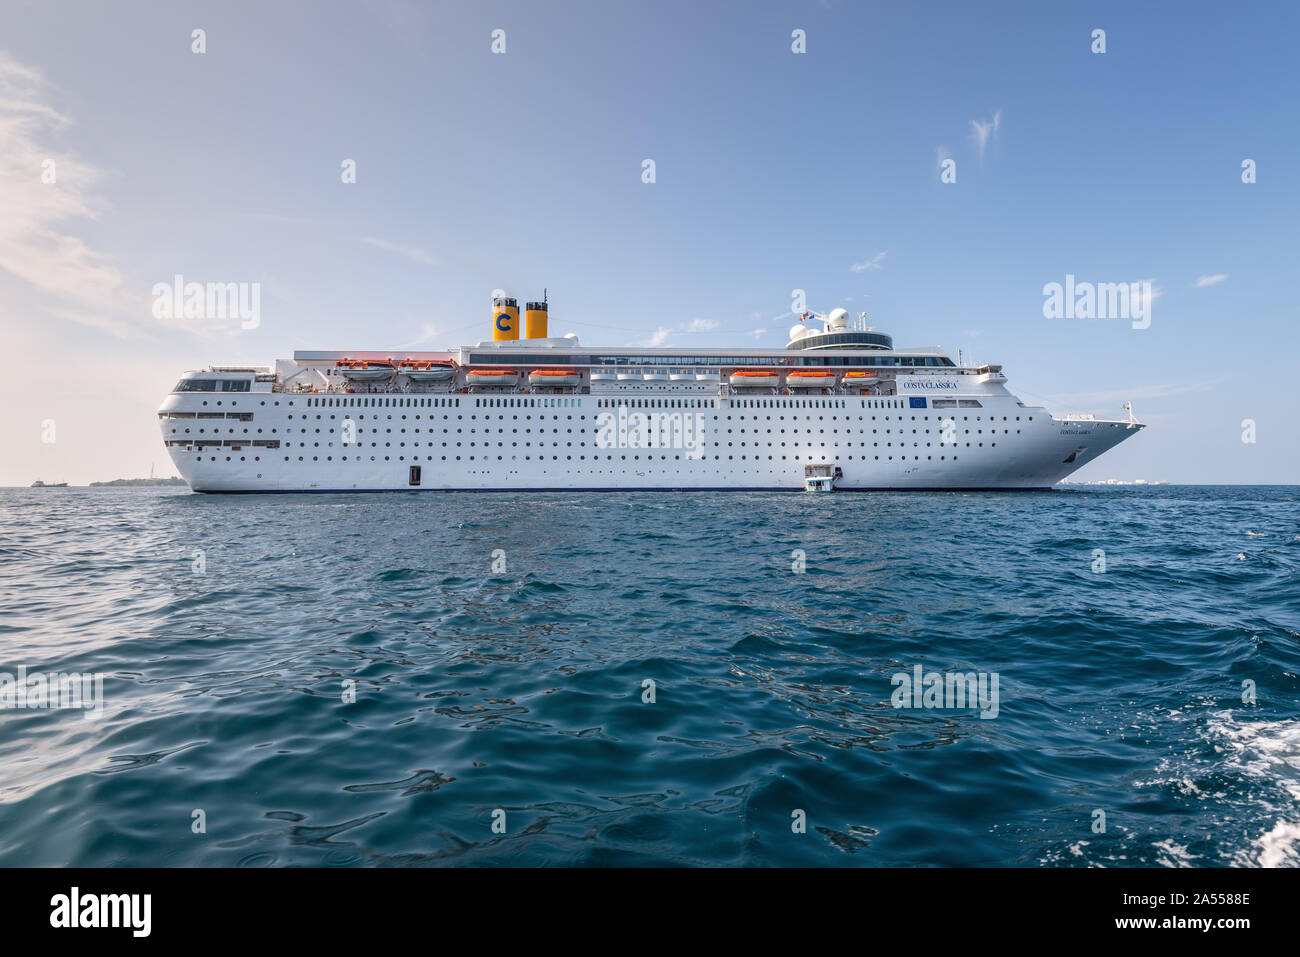 Male, Maldives - November 17, 2017: Costa neoClassica Cruise Ship in the outer harbor of Male island as seen from the boat in Maldives, Indian Ocean. Stock Photo